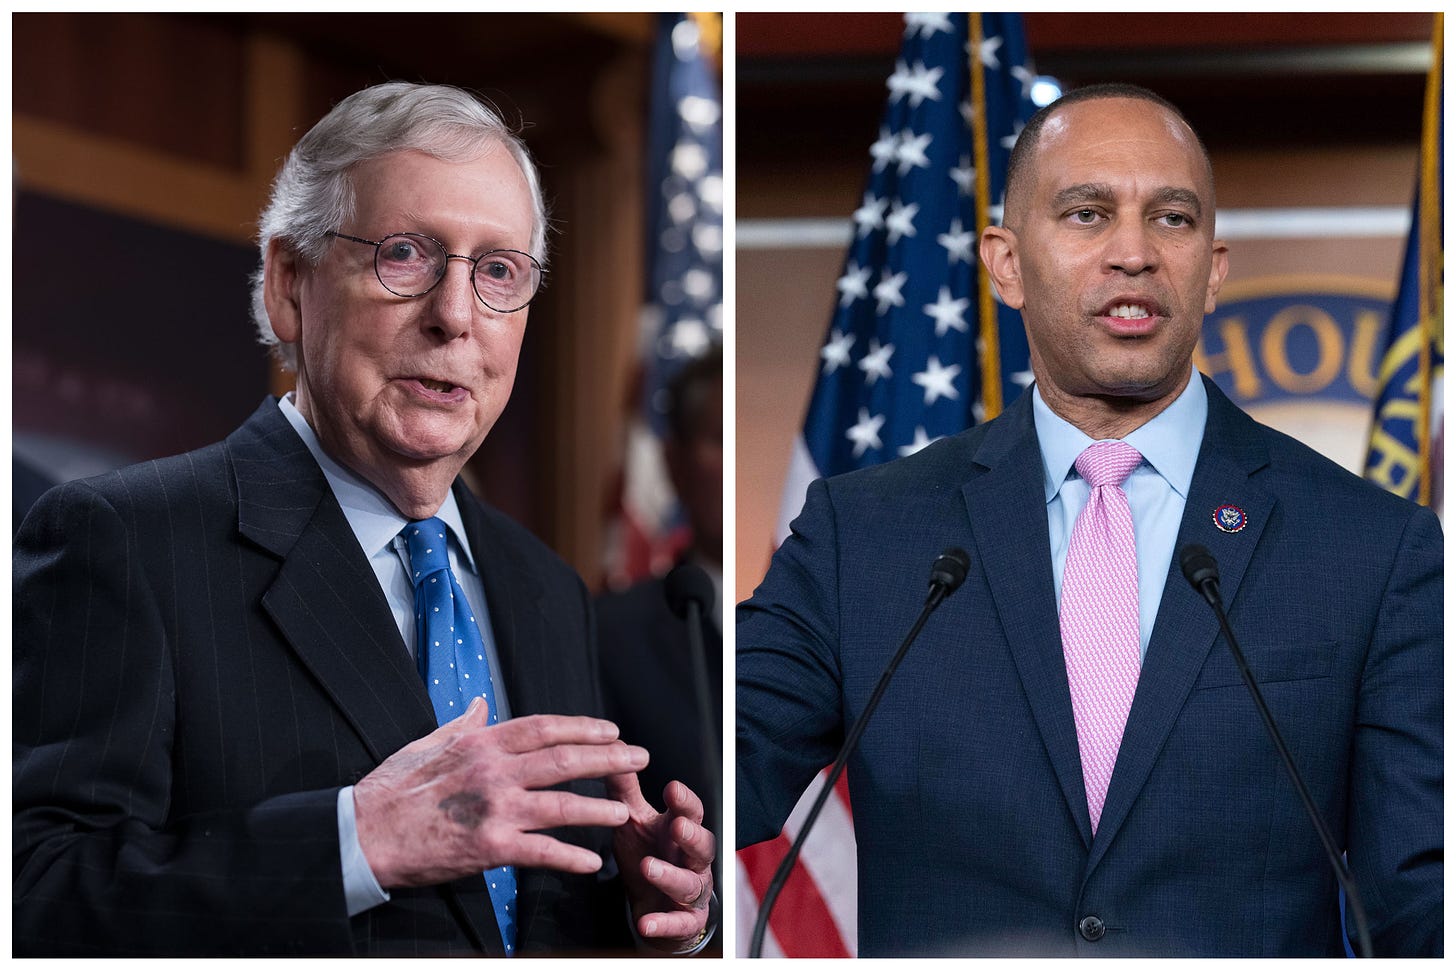 Jeffries slammed by McConnell for calling Trump 'fake'